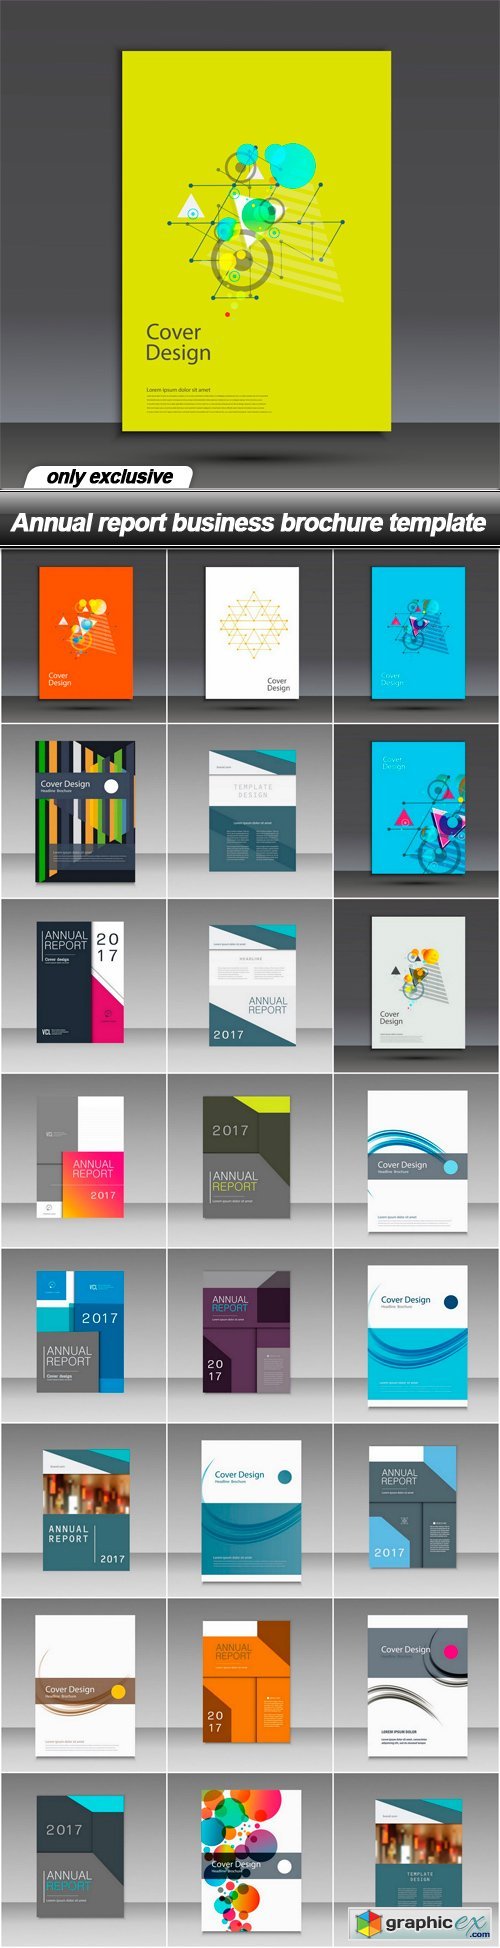 Annual report business brochure template - 25 EPS